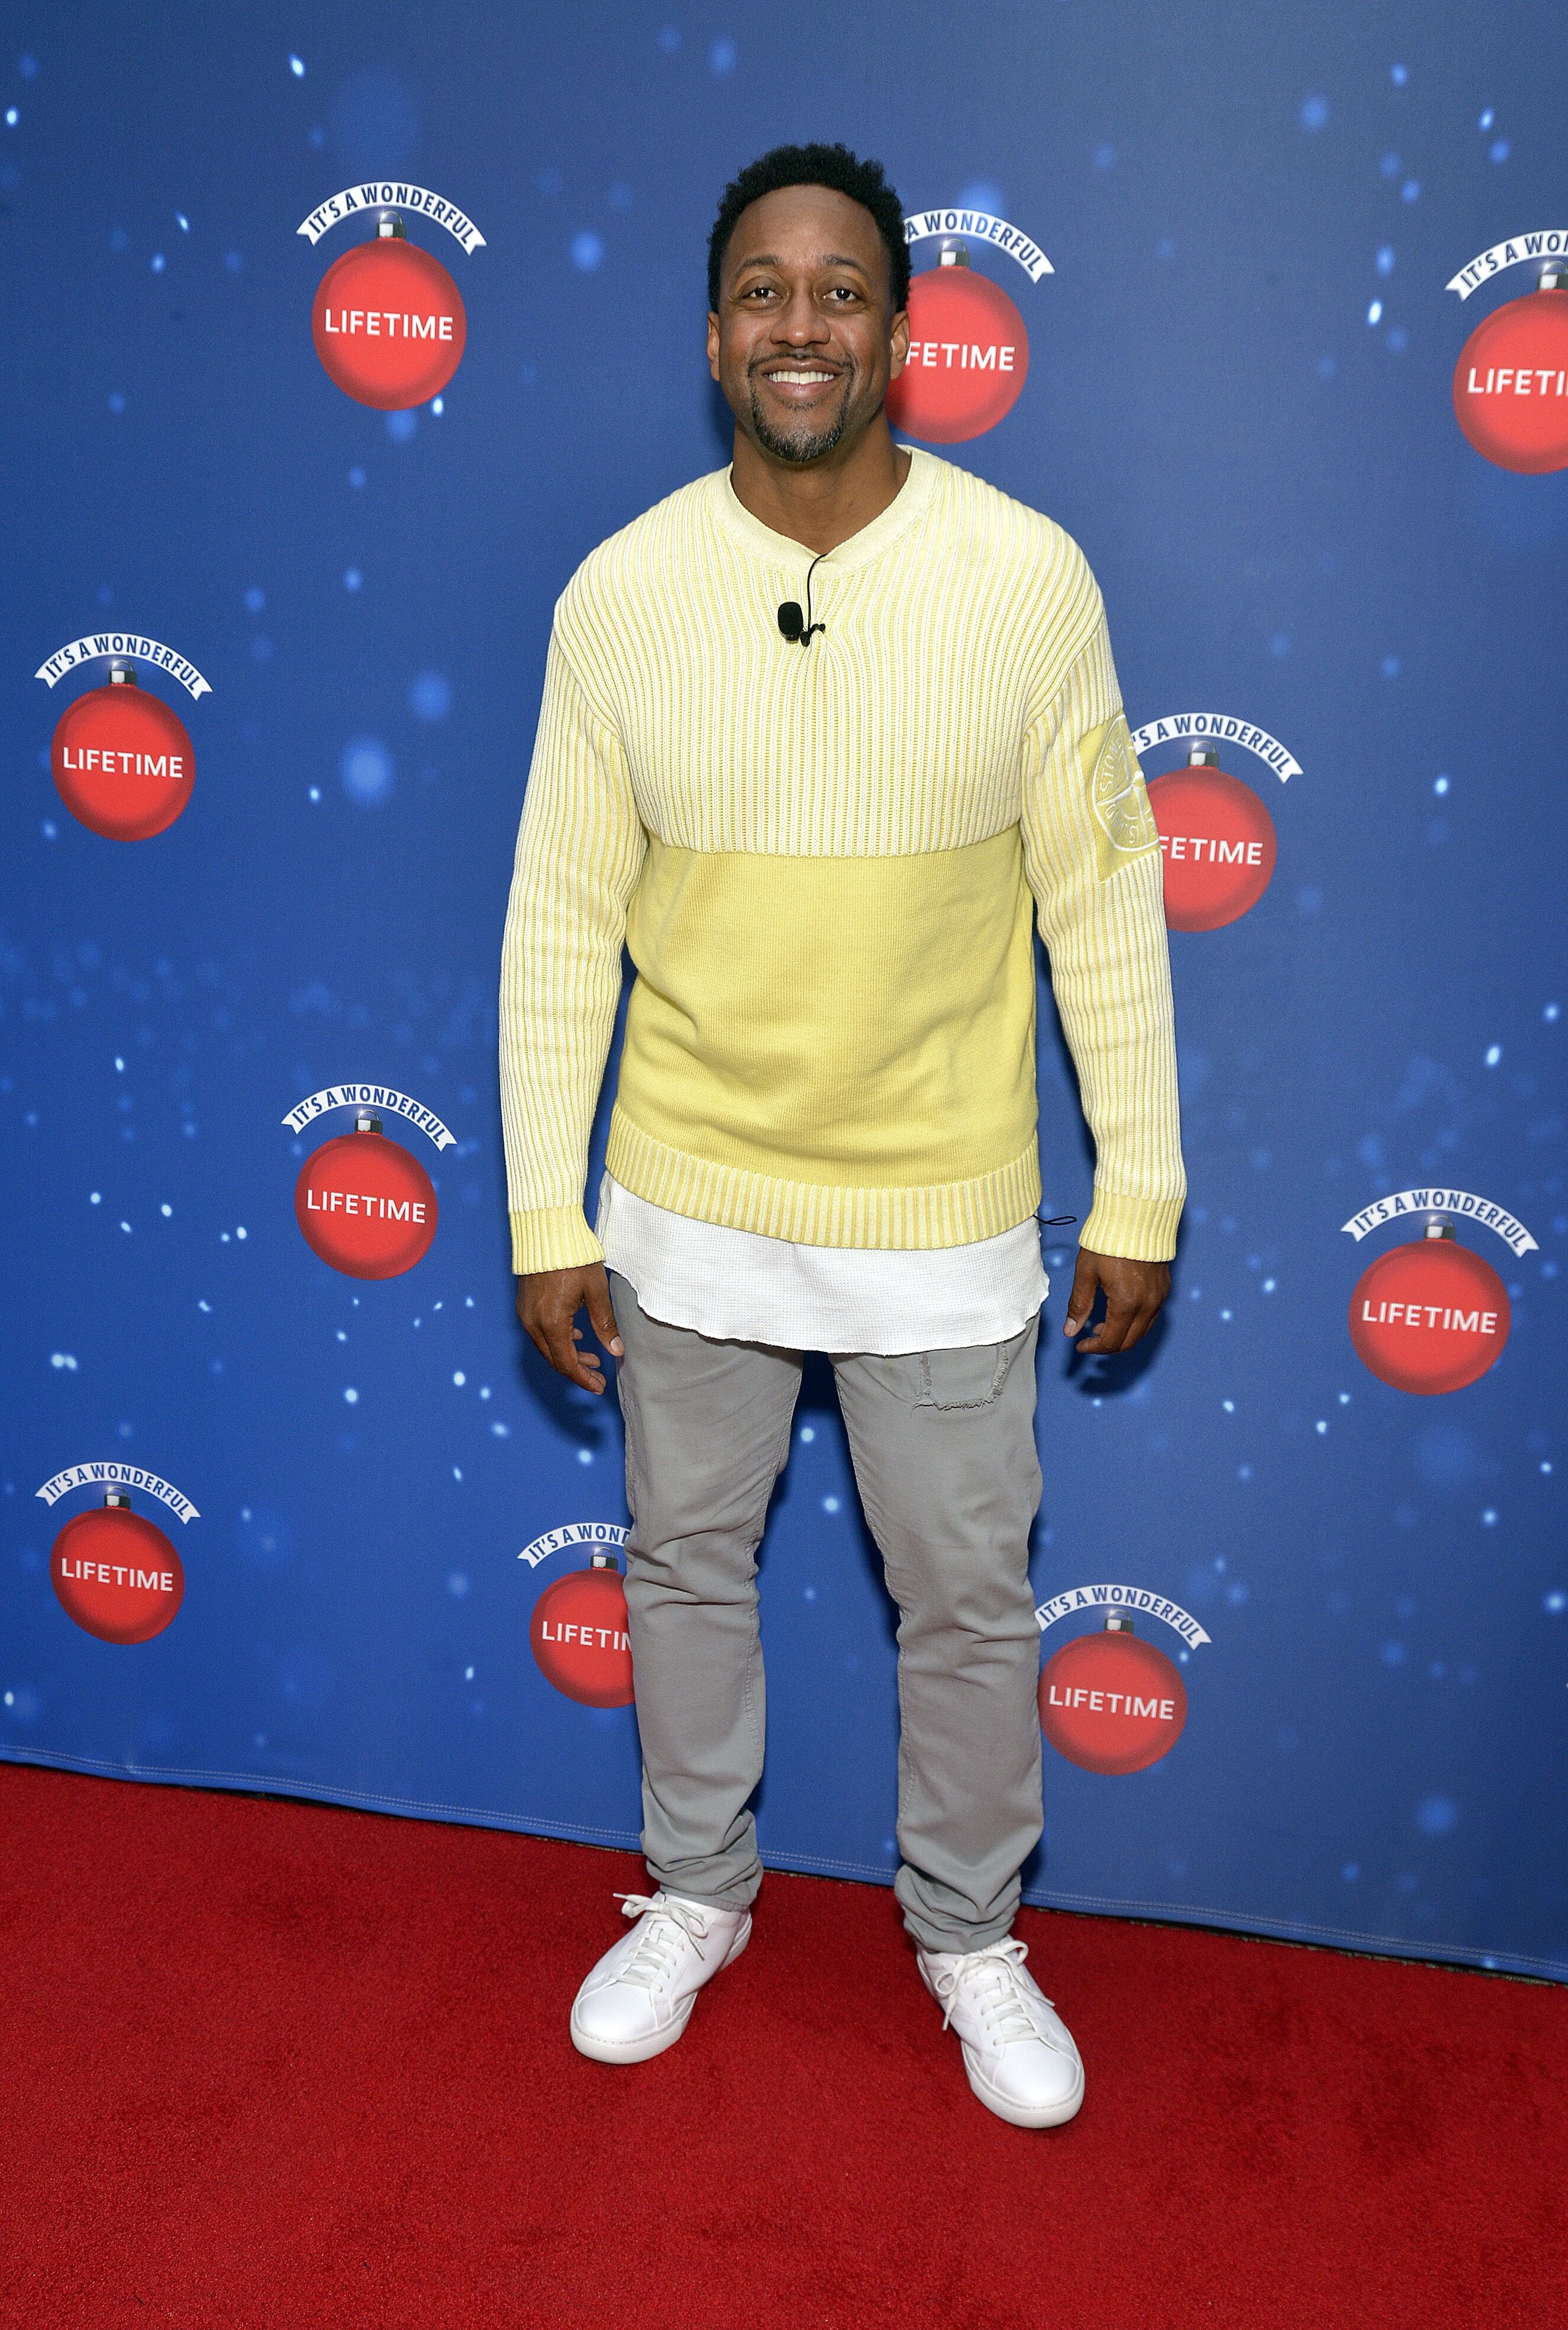 Jaleel White attends a Lifetime Christmas event | Source: Getty Images/GlobalImagesUkraine